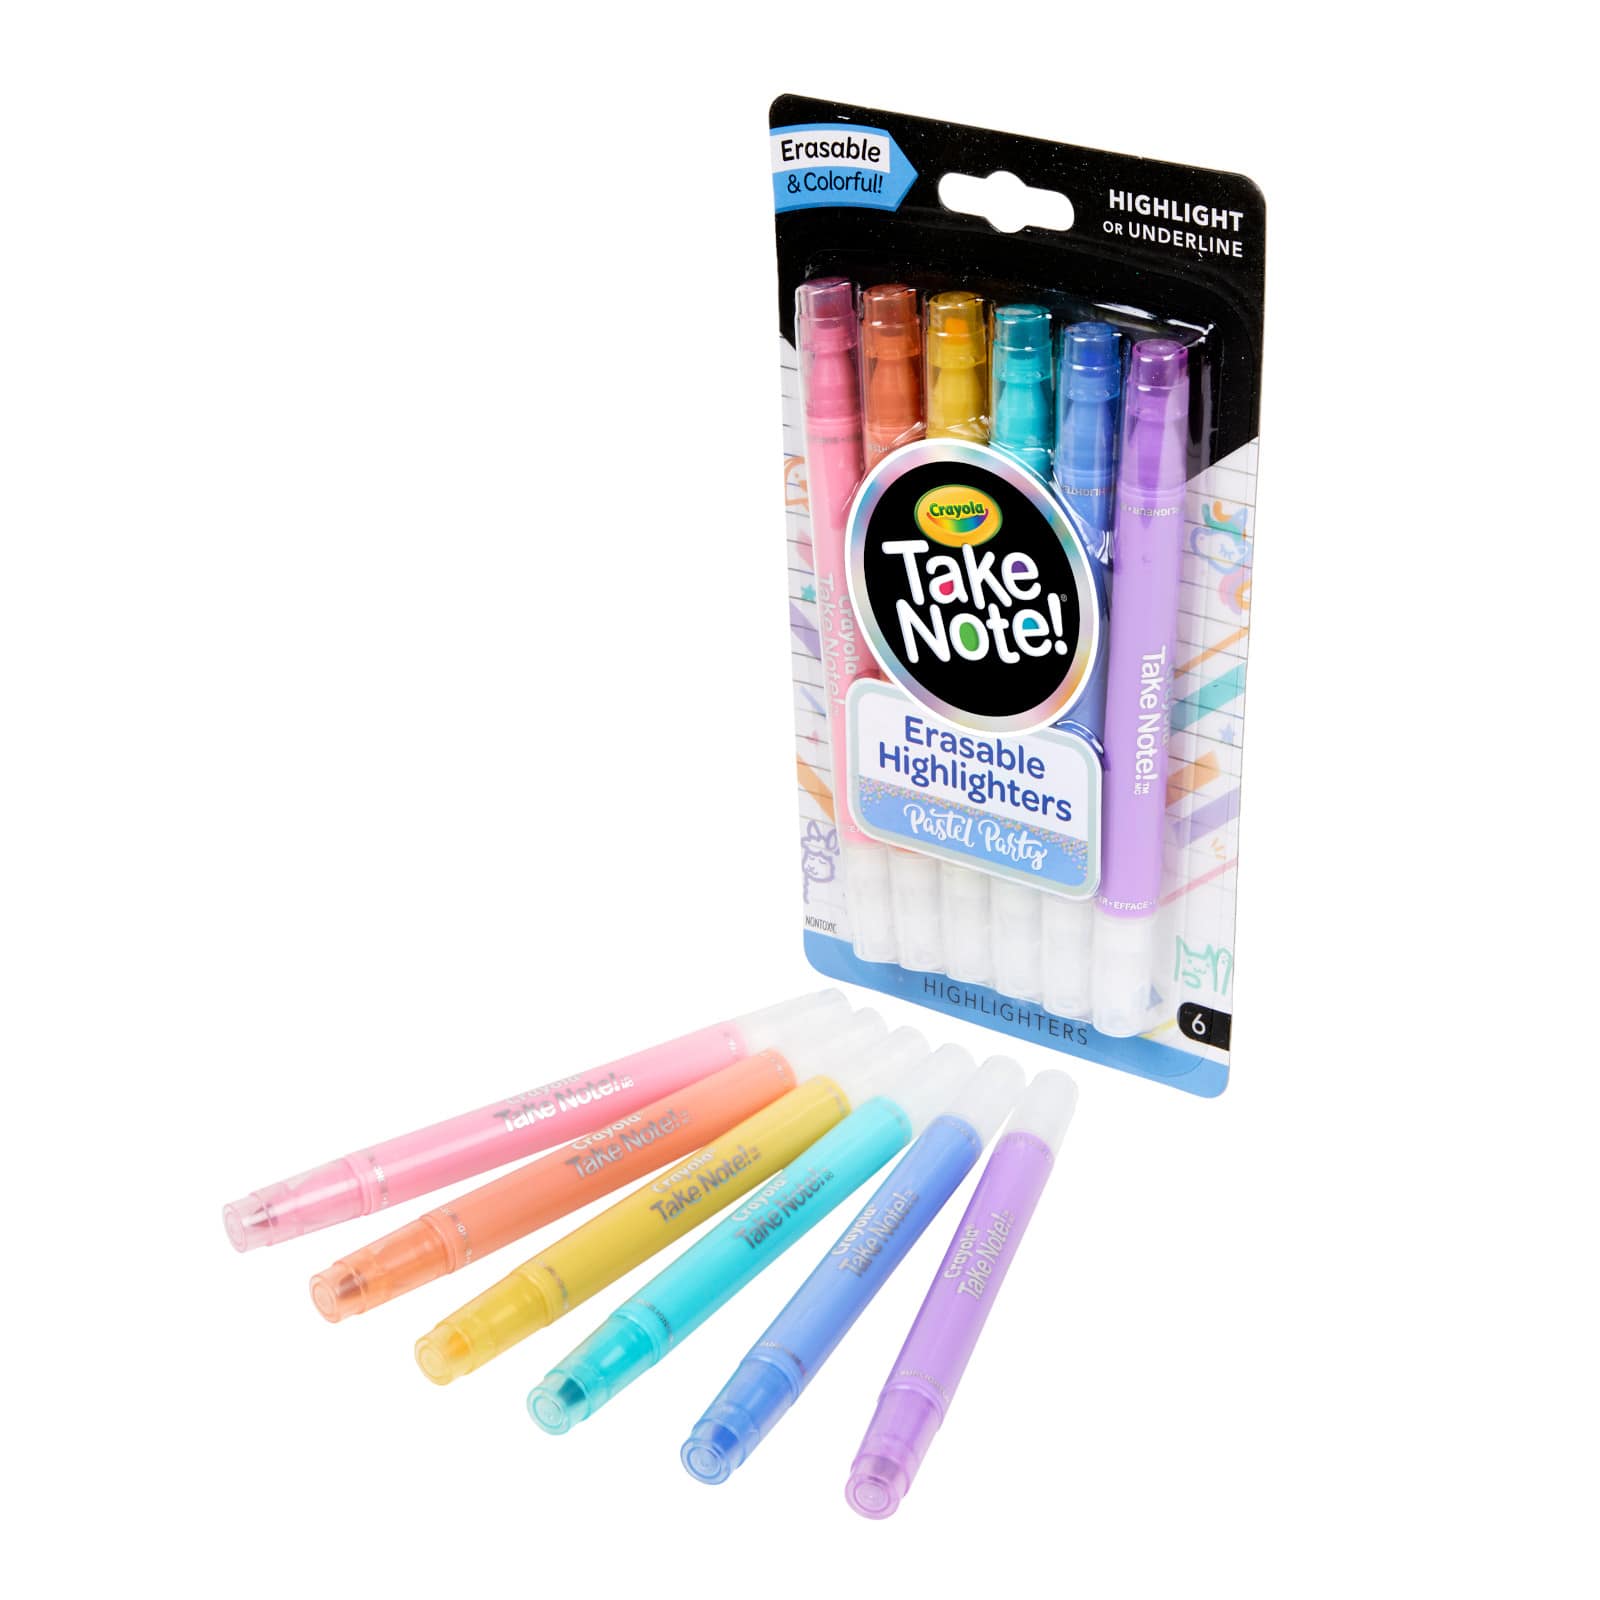 Crayola - Take Note! Colorful Writing Collection Kit